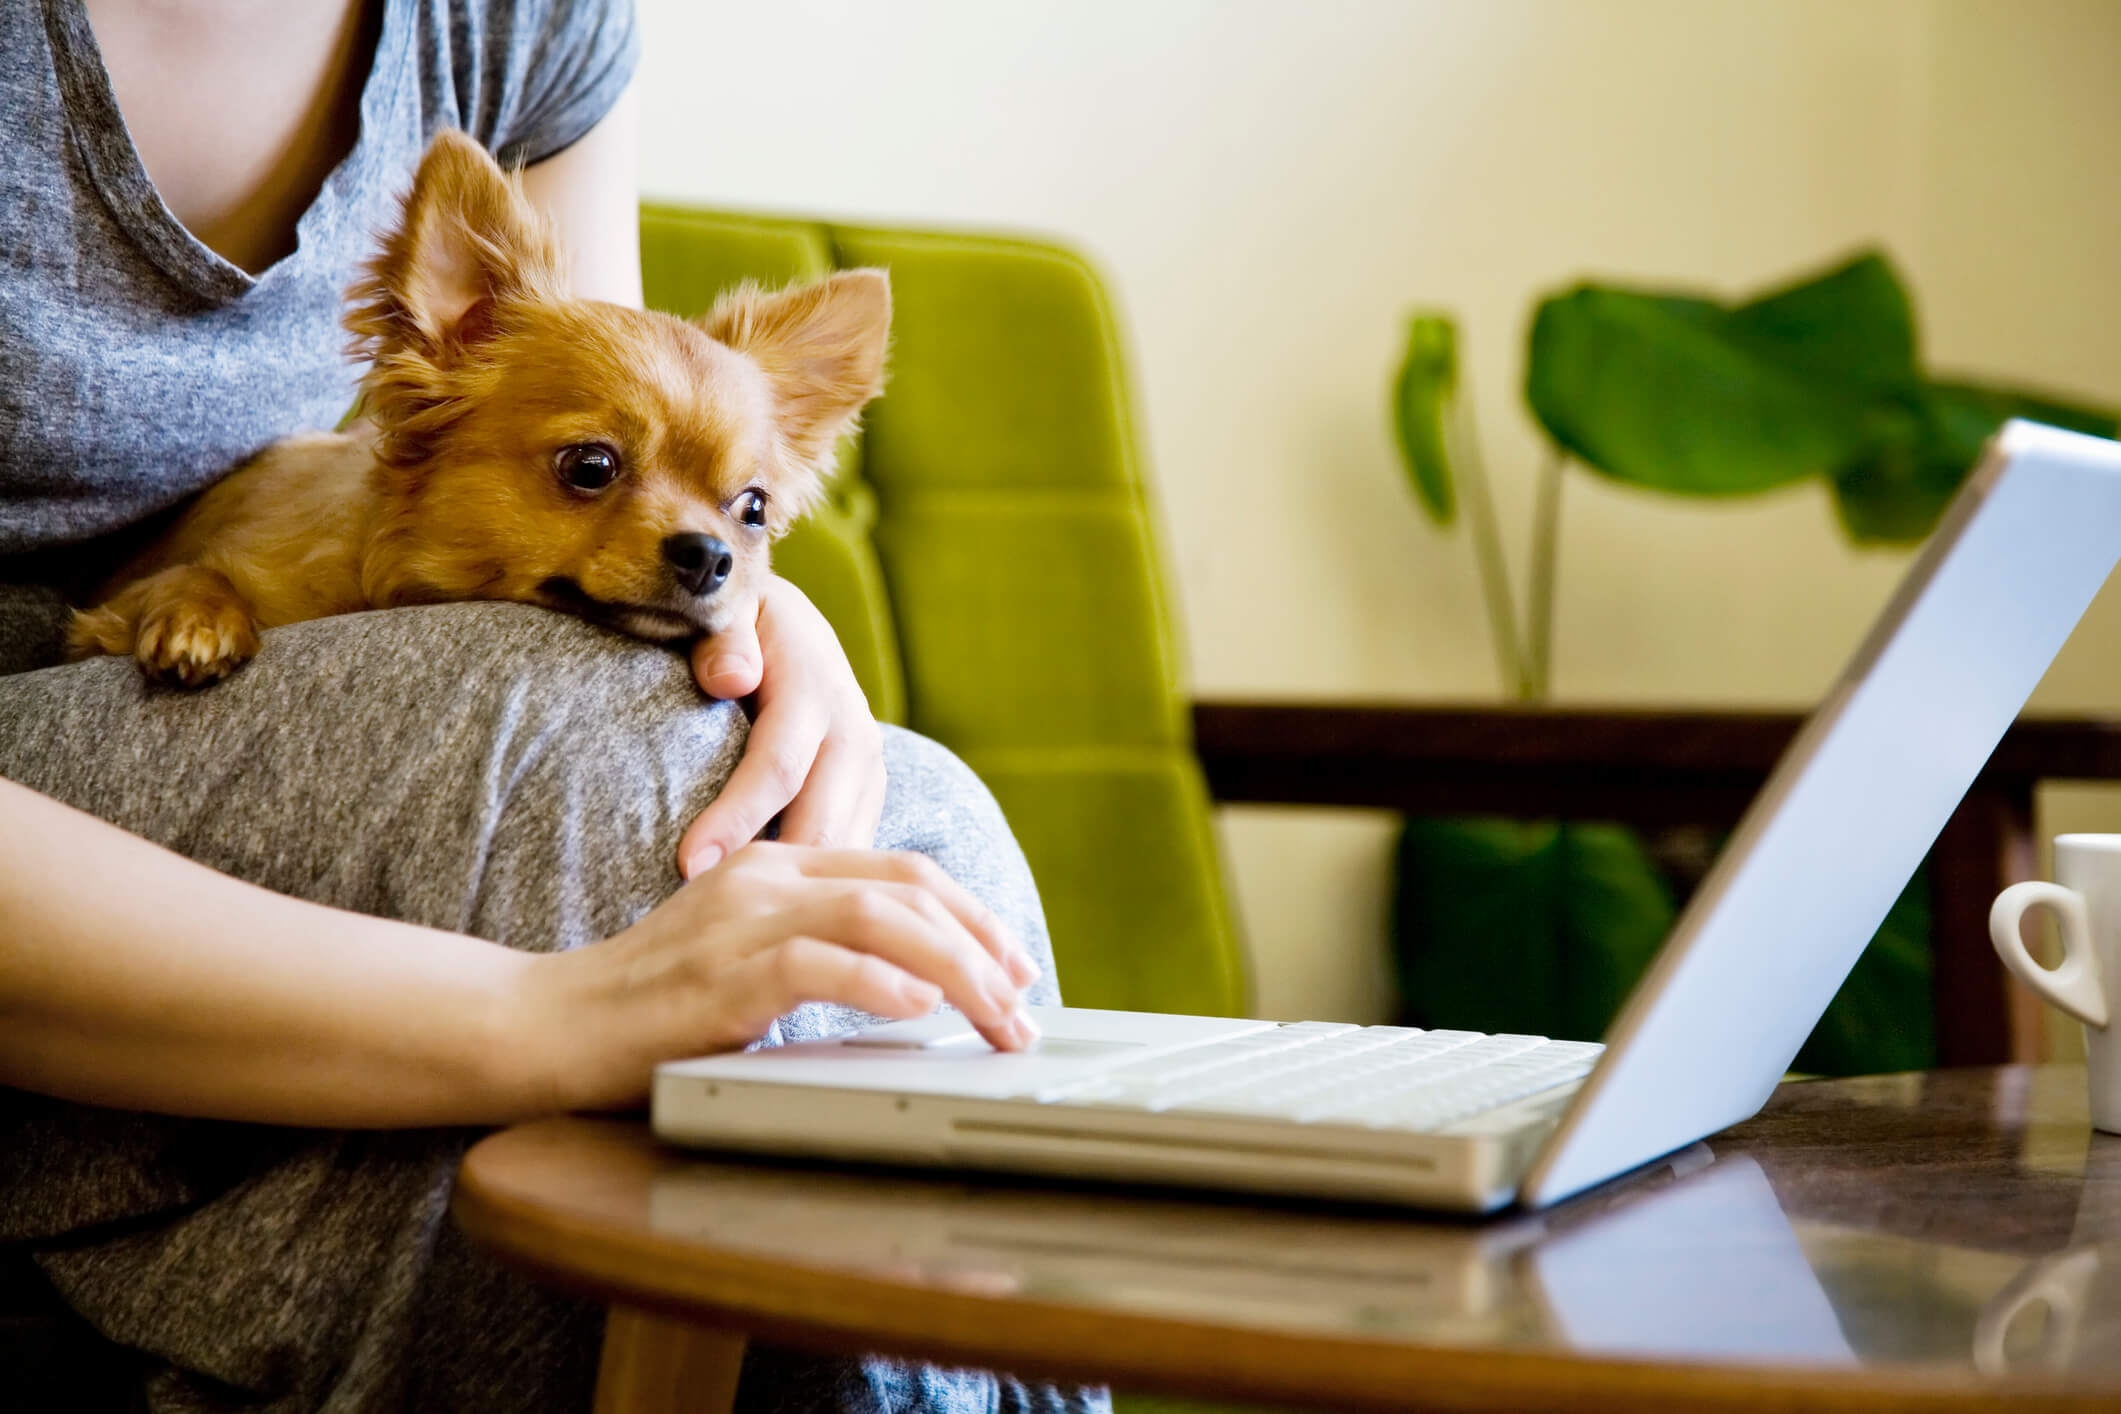 Why is my Chihuahua so Obsessed With Me? Guide to Dealing With a Clingy Chihuahua.